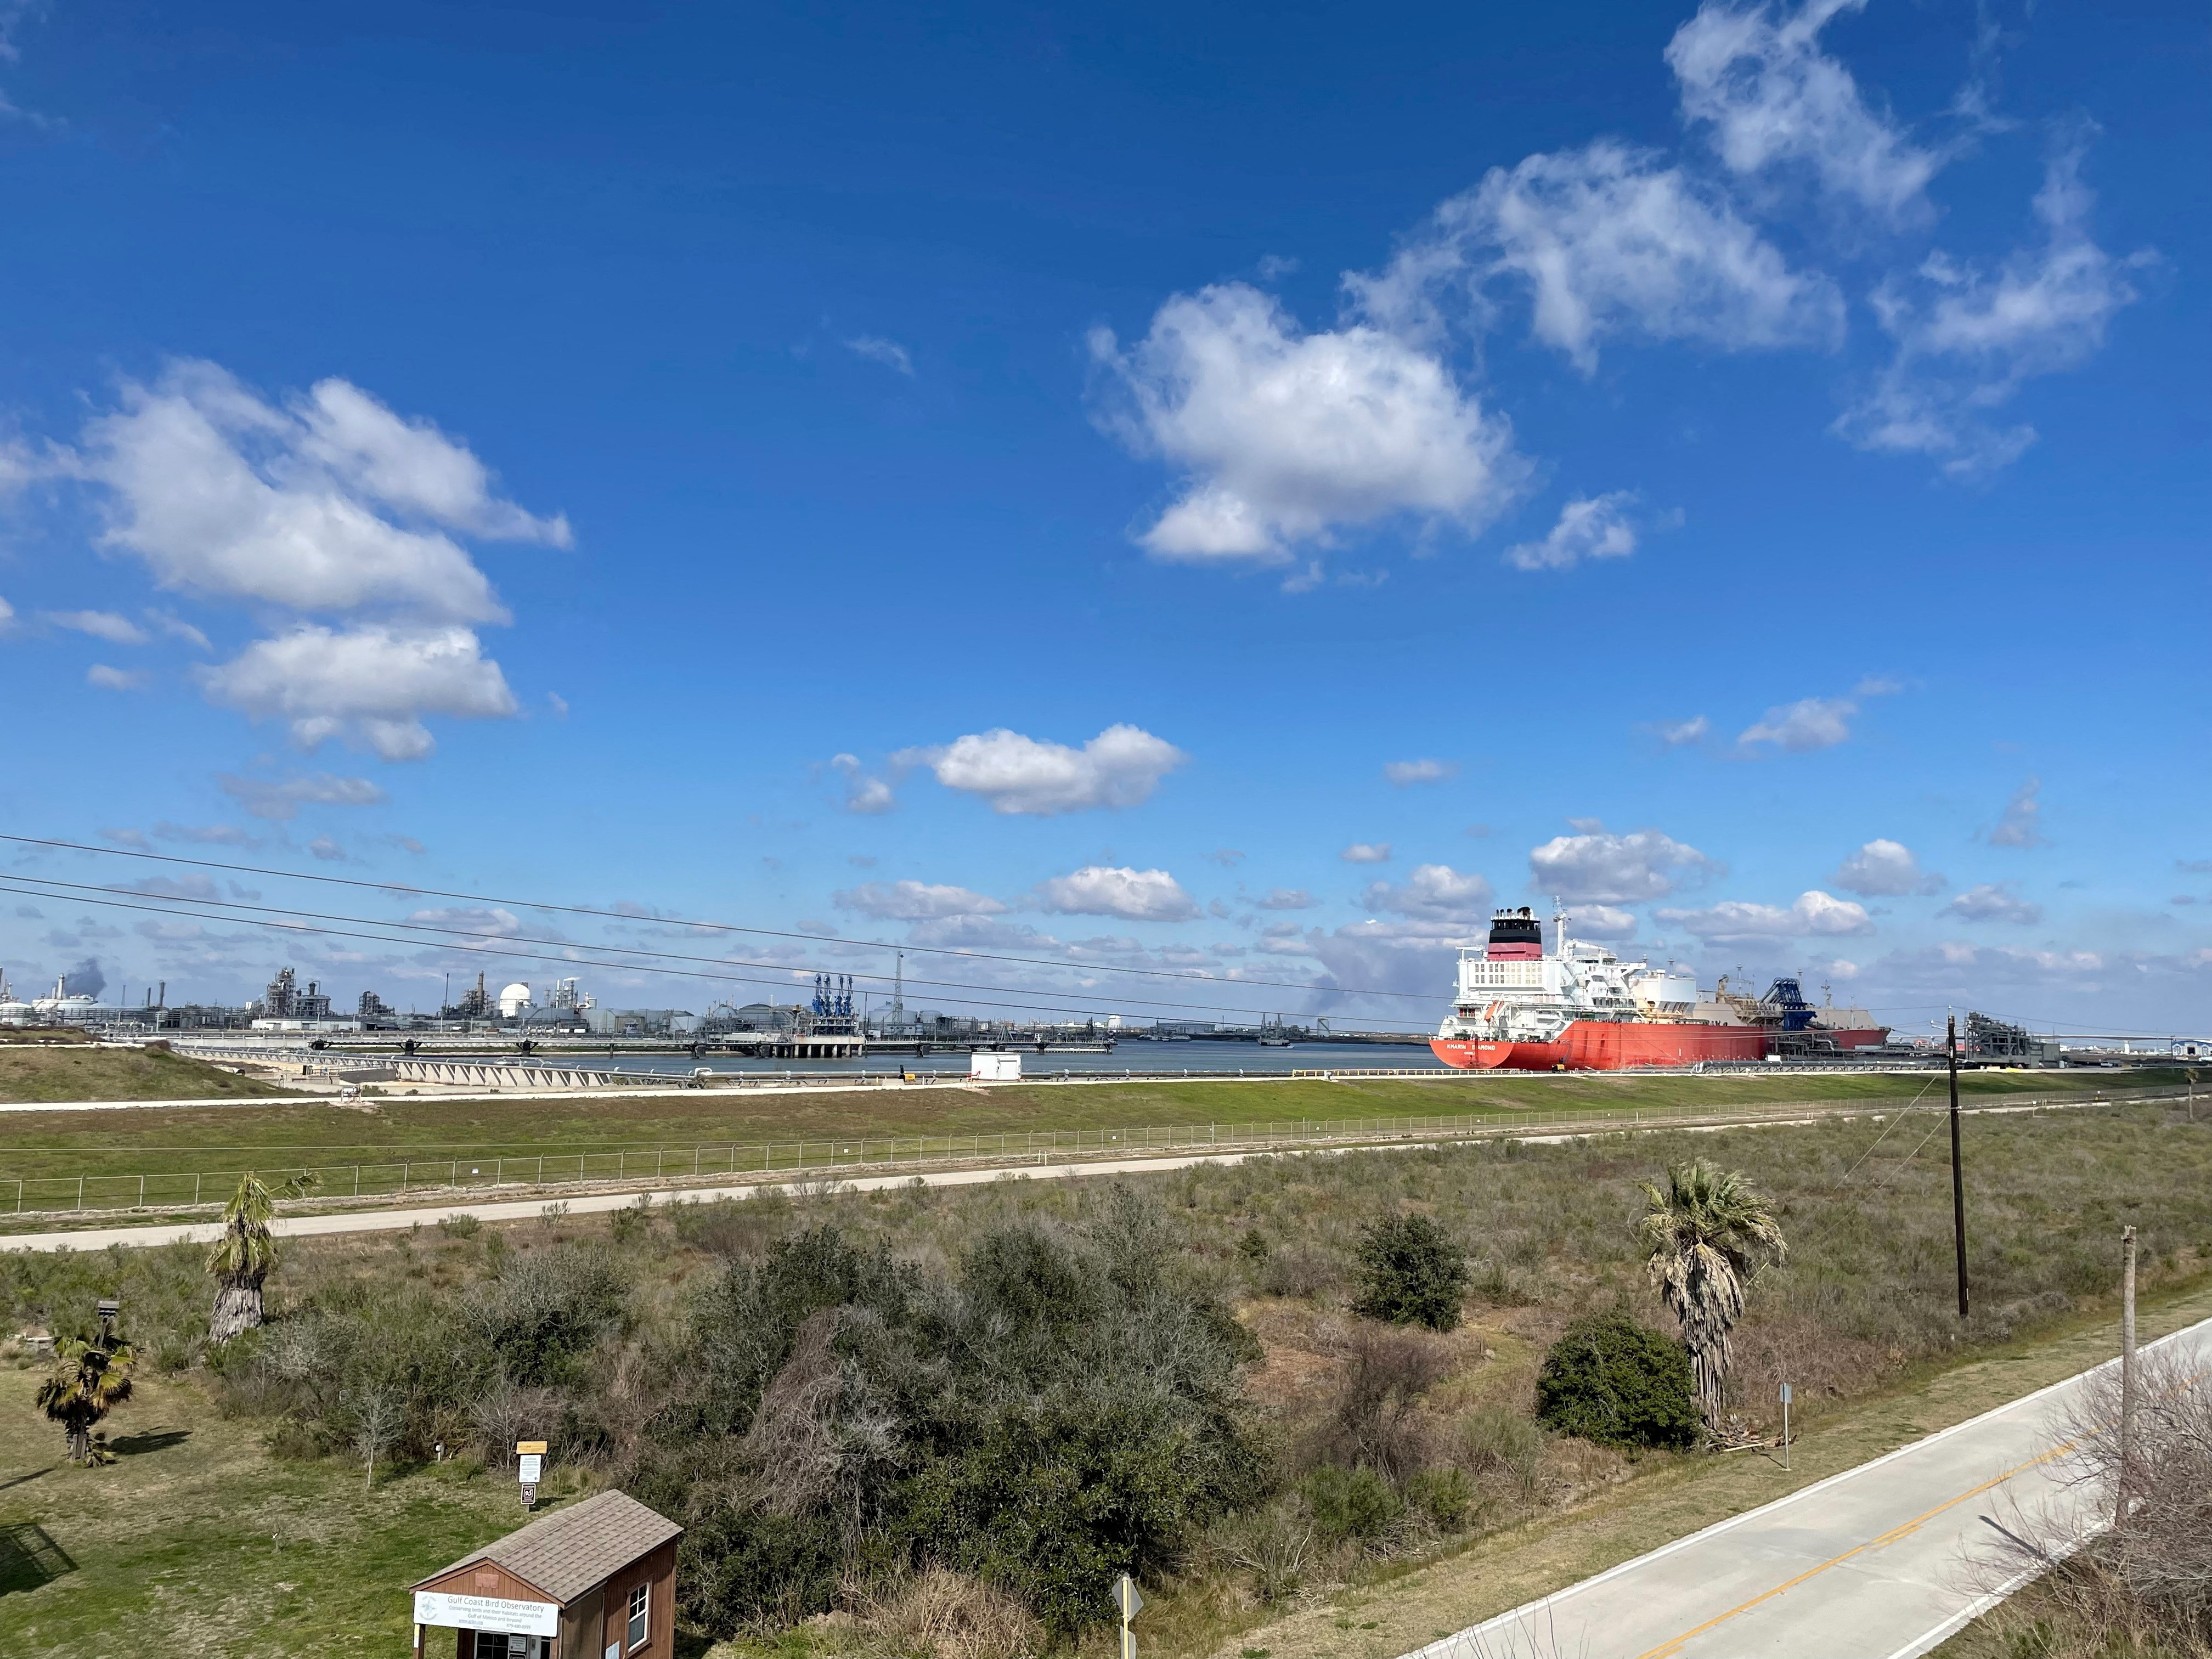 Liquified natural gas vessel Kmarin Diamond, the LNG tanker in eight months to arrive at Freeport LNG fire-idled export plant, is seen at the facility in Freeport, Texas